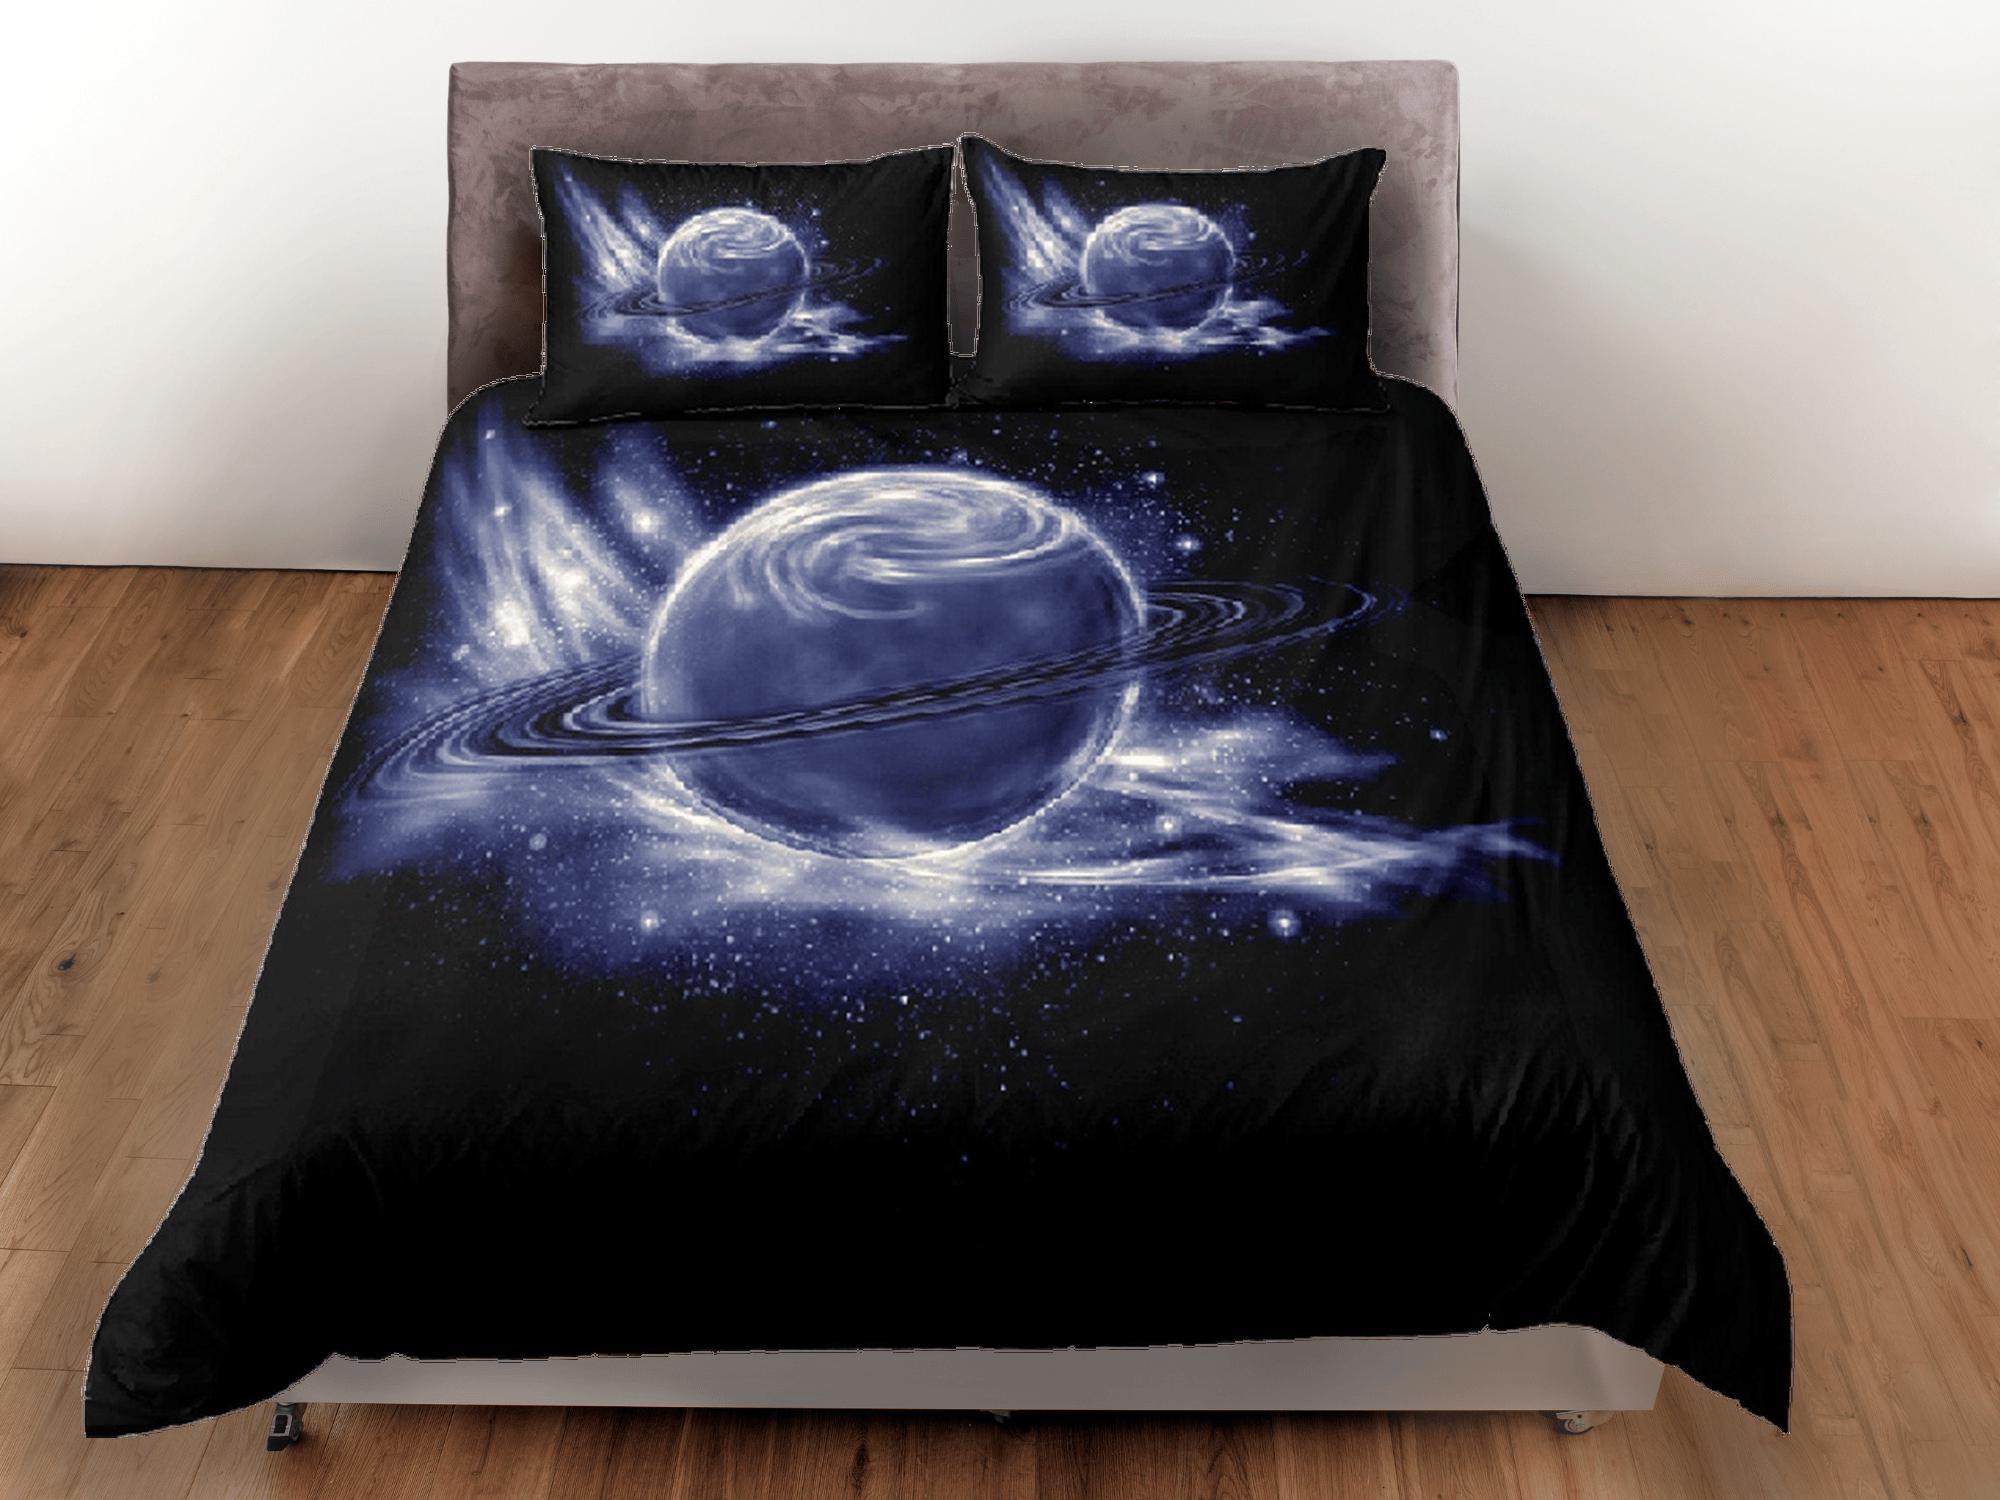 daintyduvet Grey planet duvet cover set, Saturn galaxy bedding, outer space bedding set full, duvet cover king, queen, dorm bedding, toddler bedding